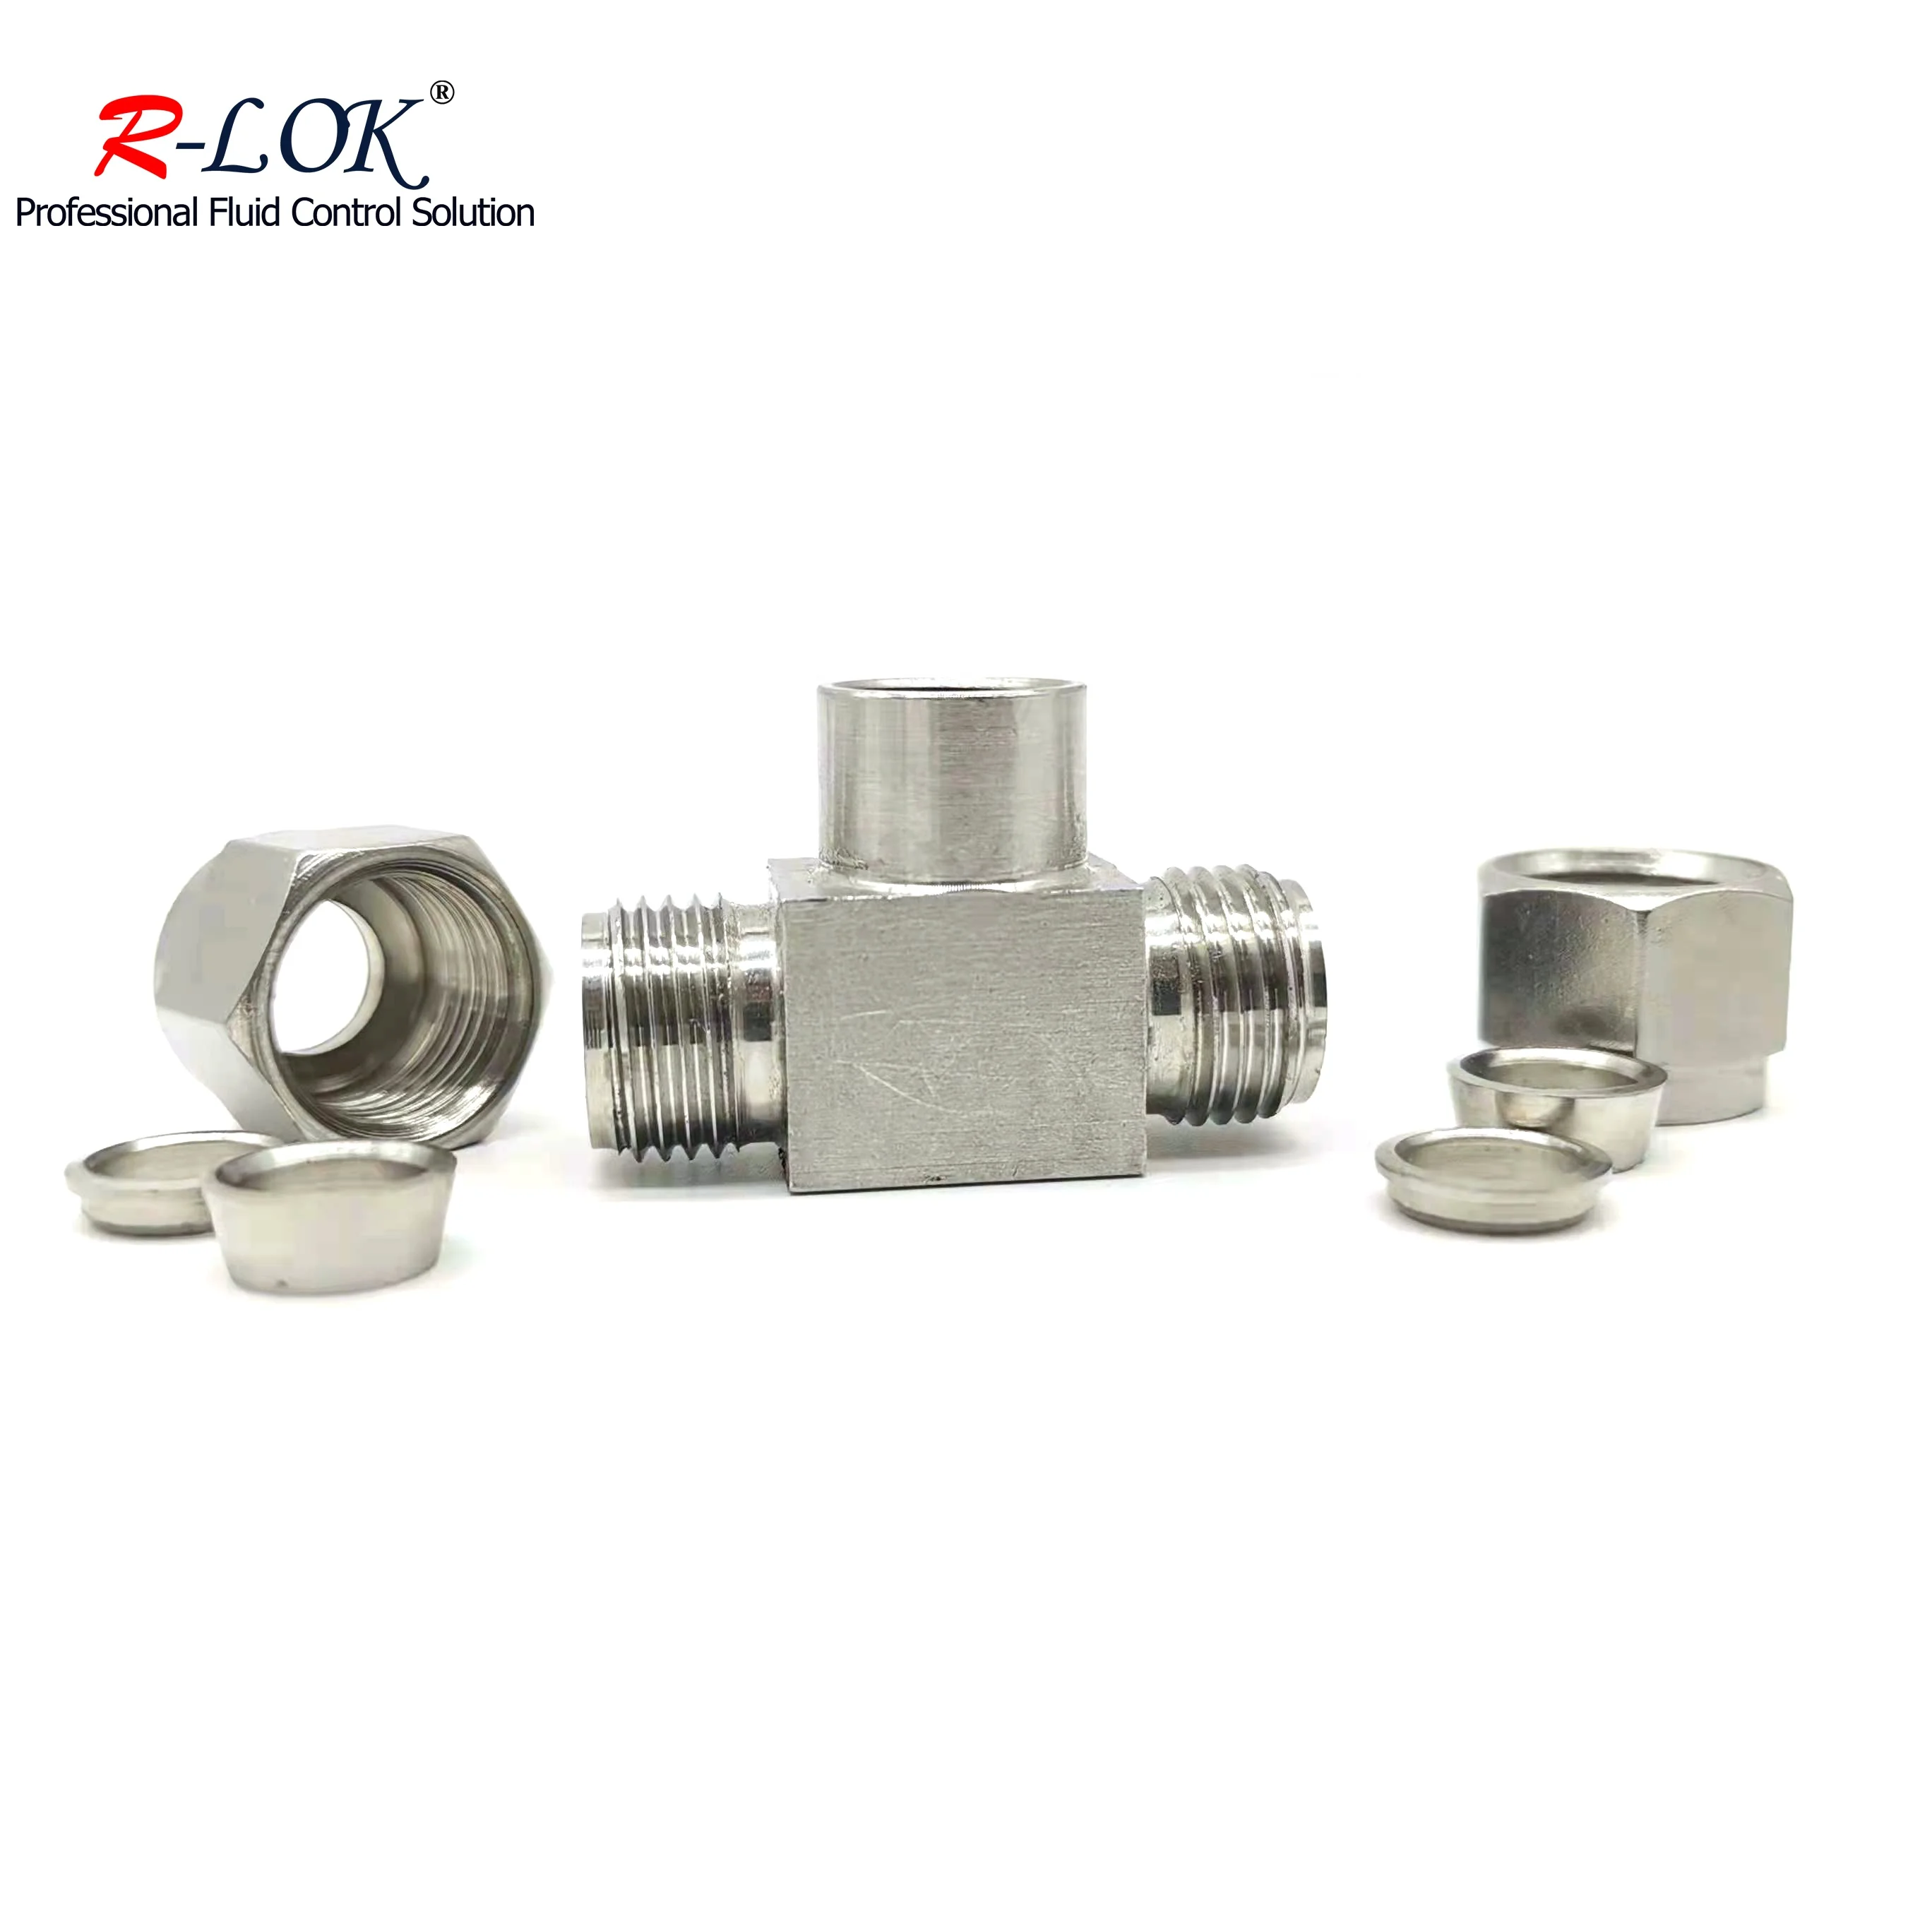 ON SALE Swagelok Tube Fittings Instrumentation Stainless Steel Compression Connector Ss316 Ferrule Female Branch Tee Union (1600302409563)